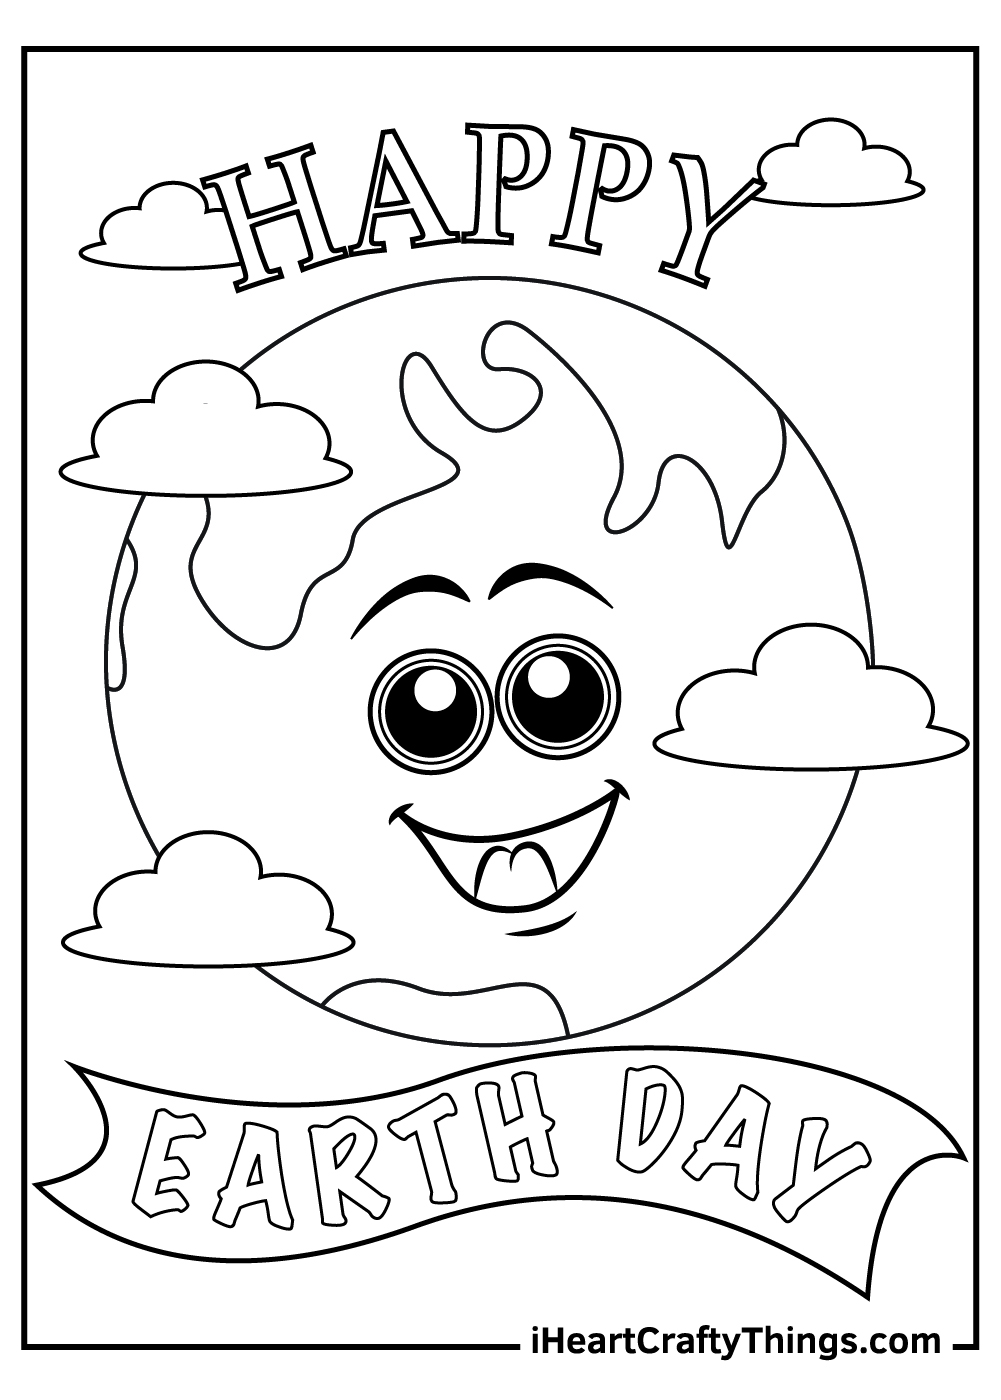 Earth Day Coloring Pages Updated 2021 